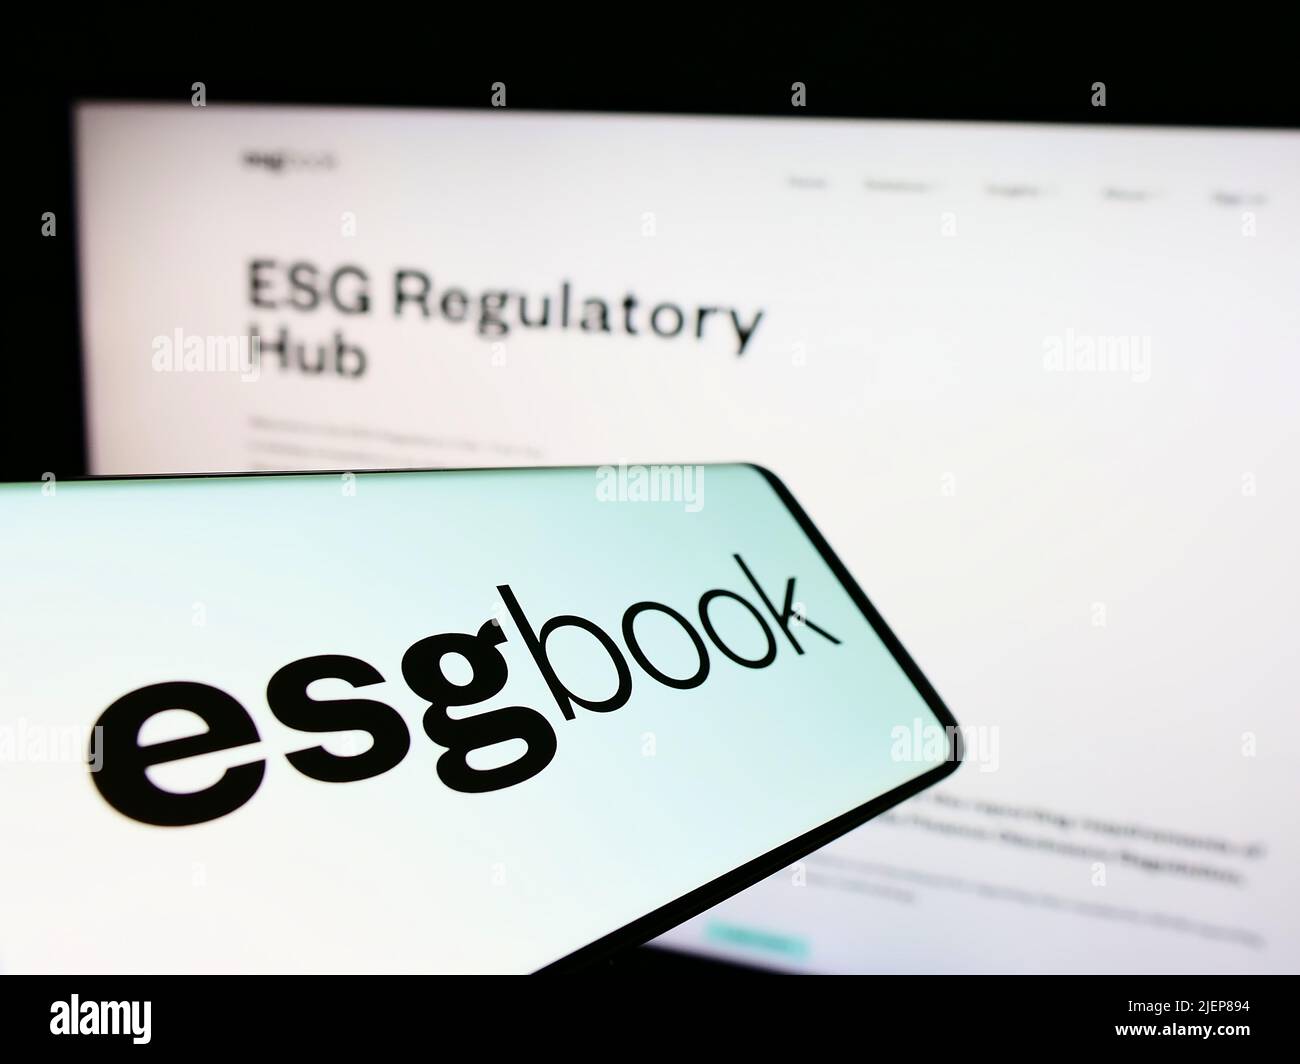 Mobile phone with logo of British sustainability data company ESG Book on screen in front of business website. Focus on center of phone display. Stock Photo